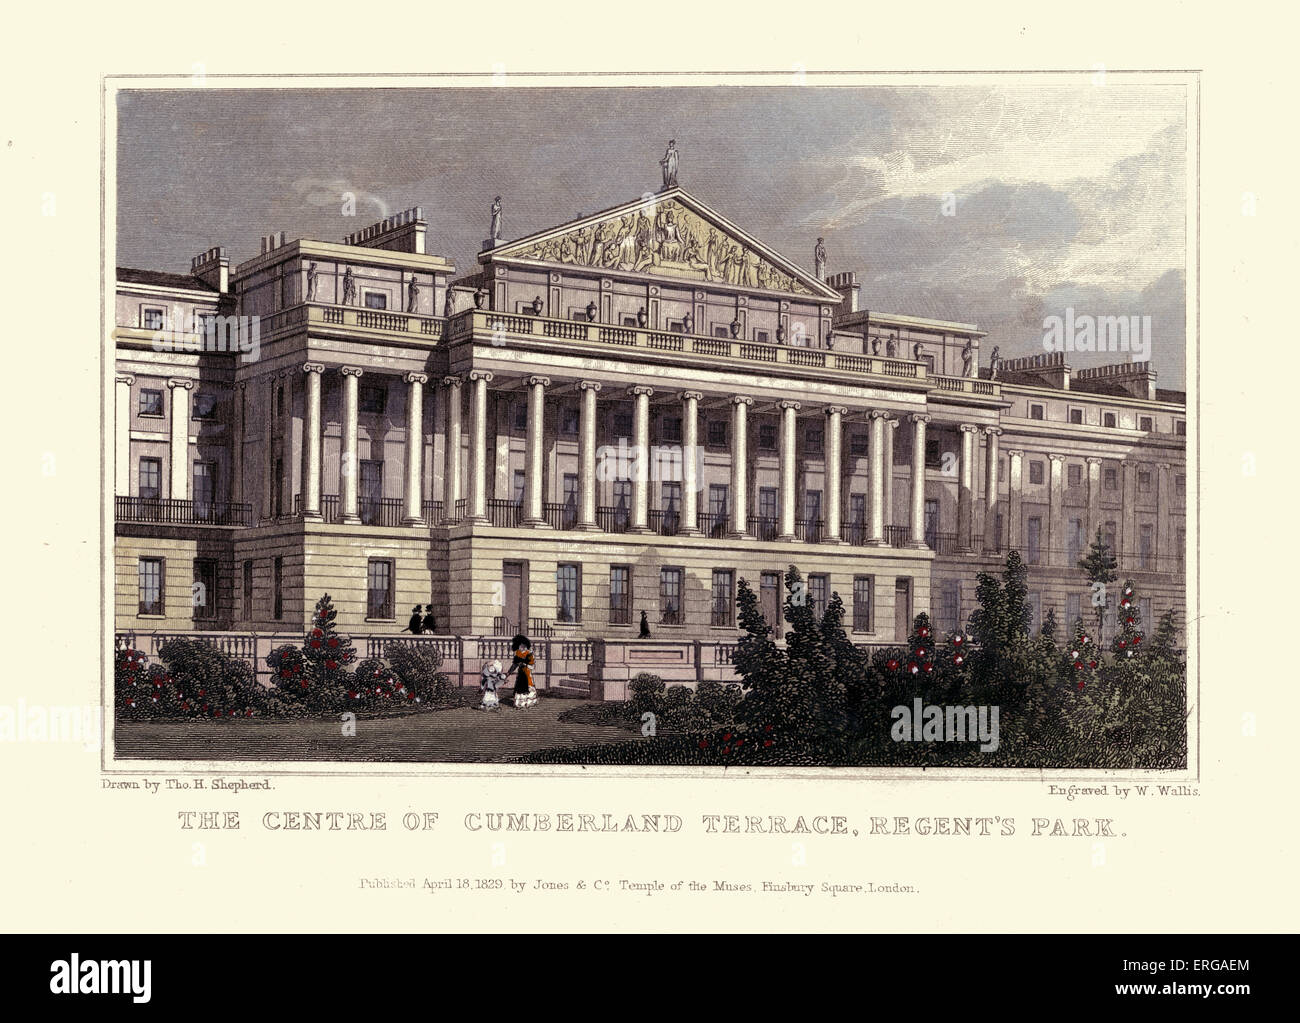 London Views:  The Centre of Cumberland Terrace, Regent's Park.  Drawn by Thomas Hosmer Shepherd 1792 – 1864. Engraved by W. Stock Photo